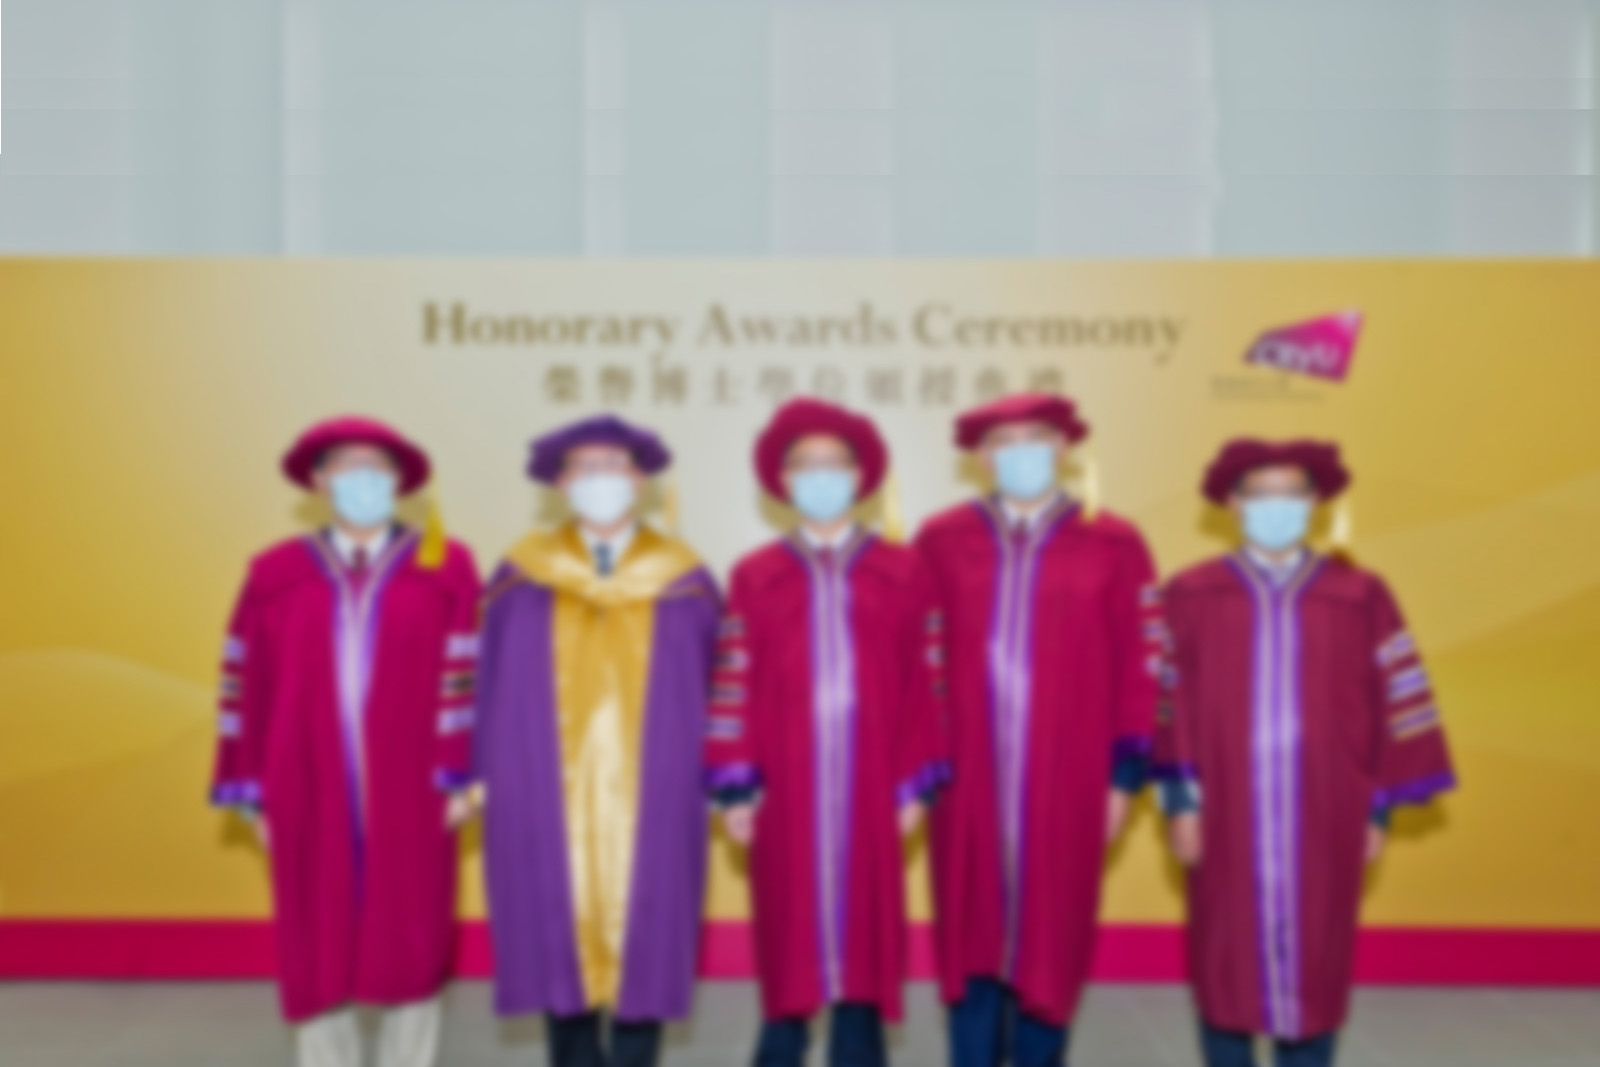 Two distinguished persons conferred honorary doctorates by CityU